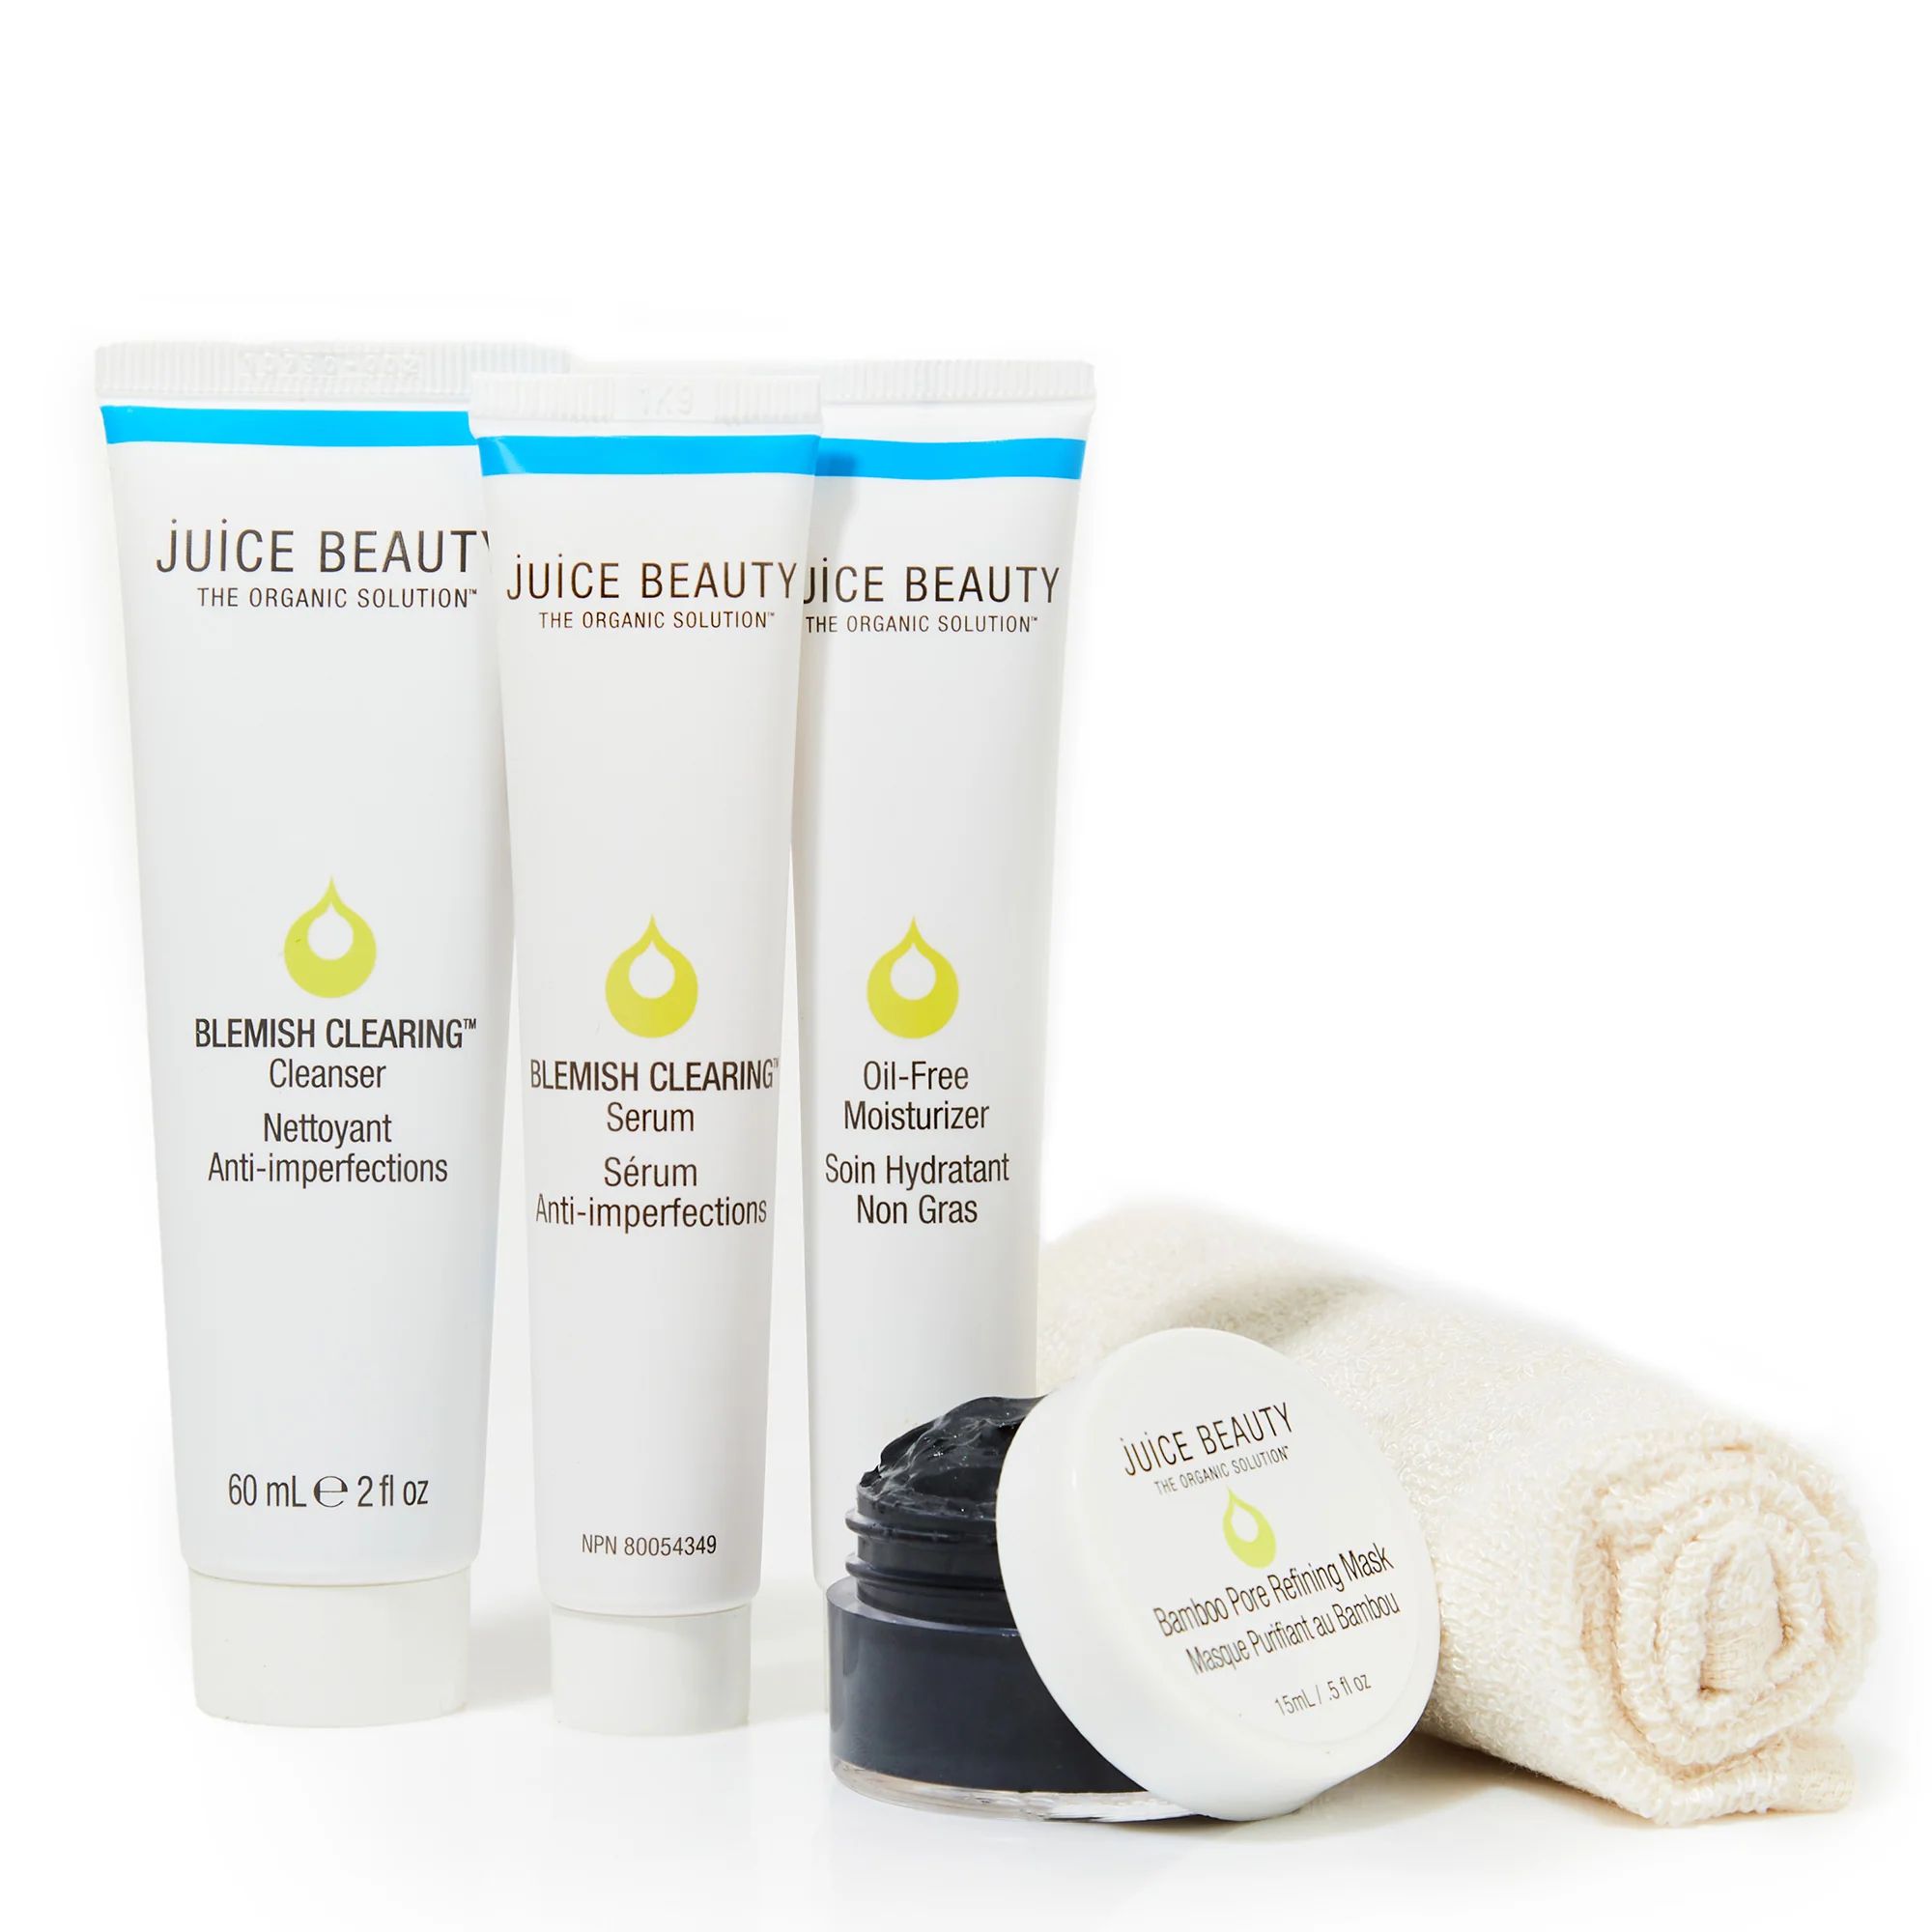 BLEMISH CLEARING Solutions Kit | juicebeauty.com (US)